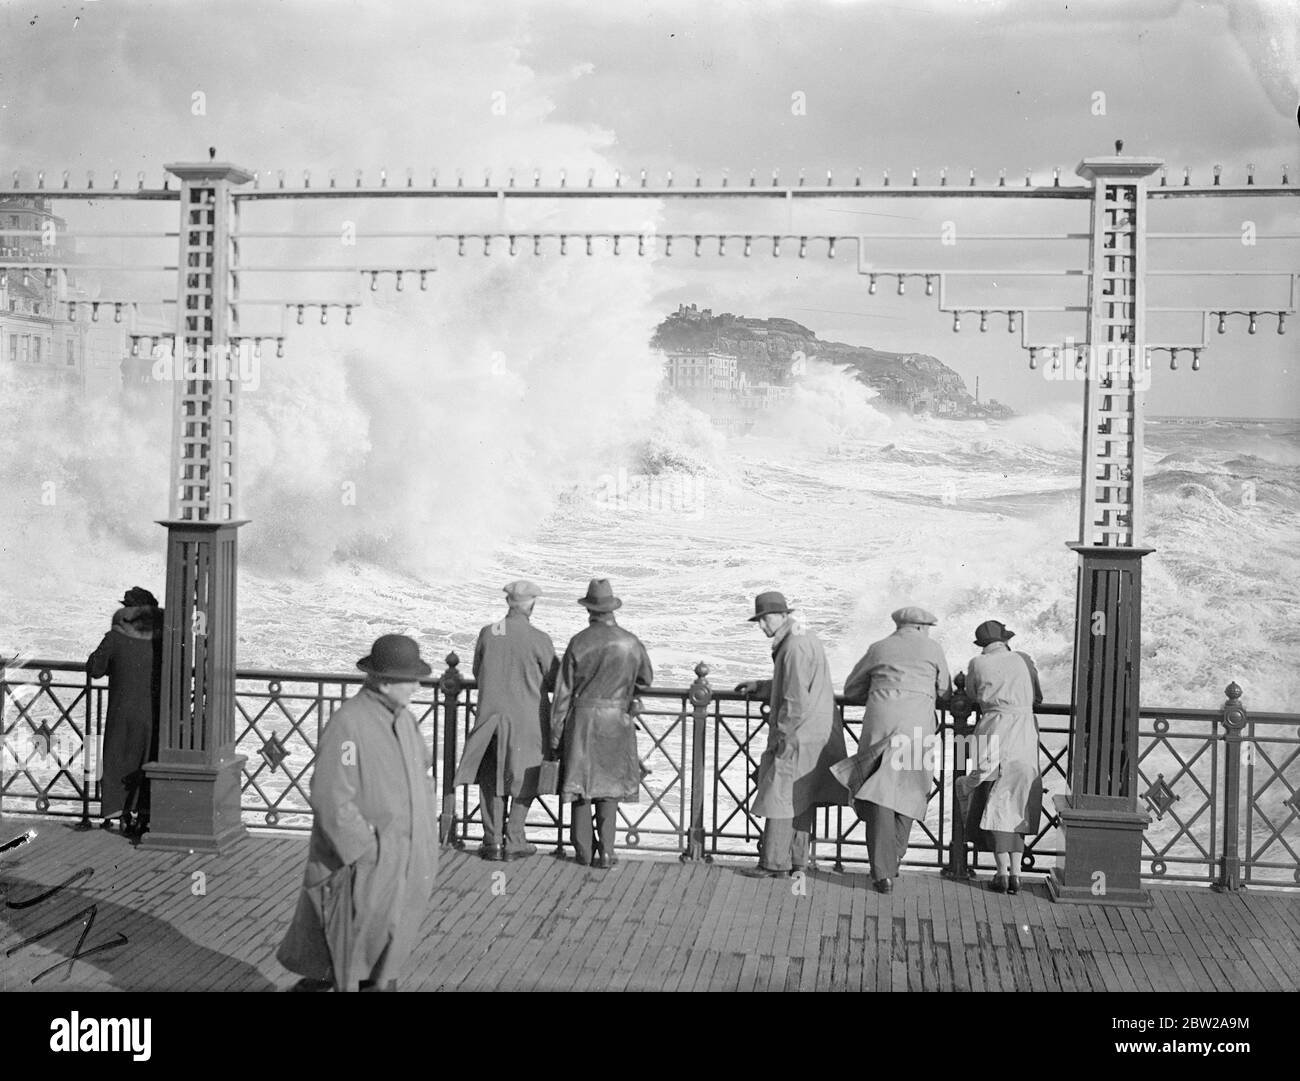 Angry seas spend their forces at Hastings. Angry seas battering in a mist of white spray against the front at Hastings, watched by rain coated men, in the autumn gale which swept the Sussex resort. Gales general over the whole of the south coast. 24 October 1937 Stock Photo